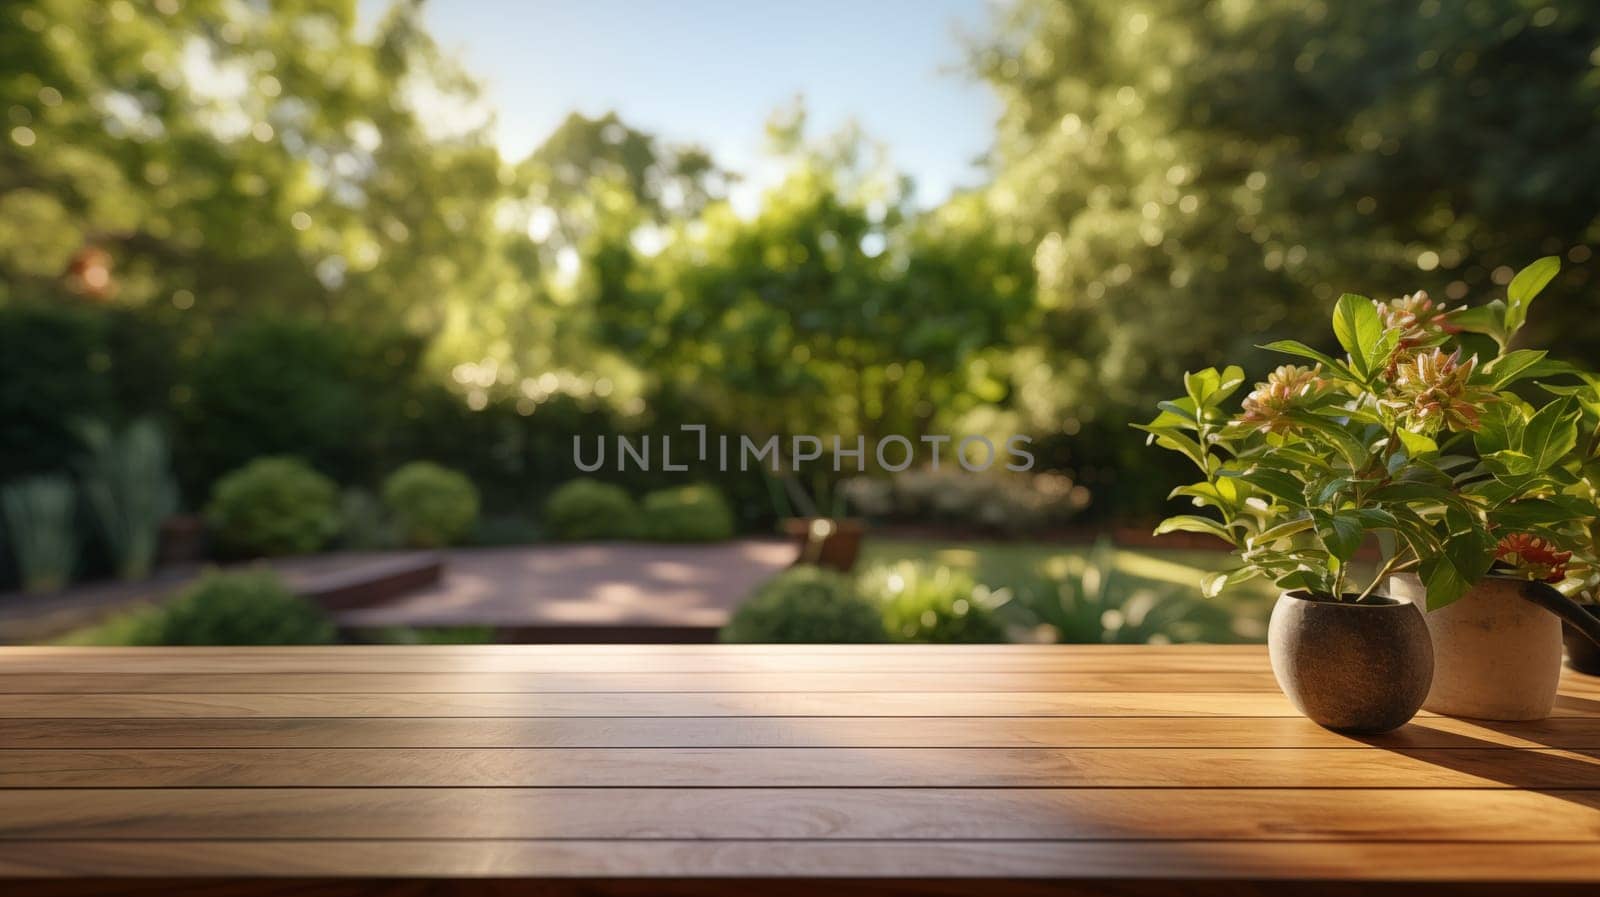 Peaceful garden scene with sunlit foliage and flowering plant on wooden table. by Zakharova